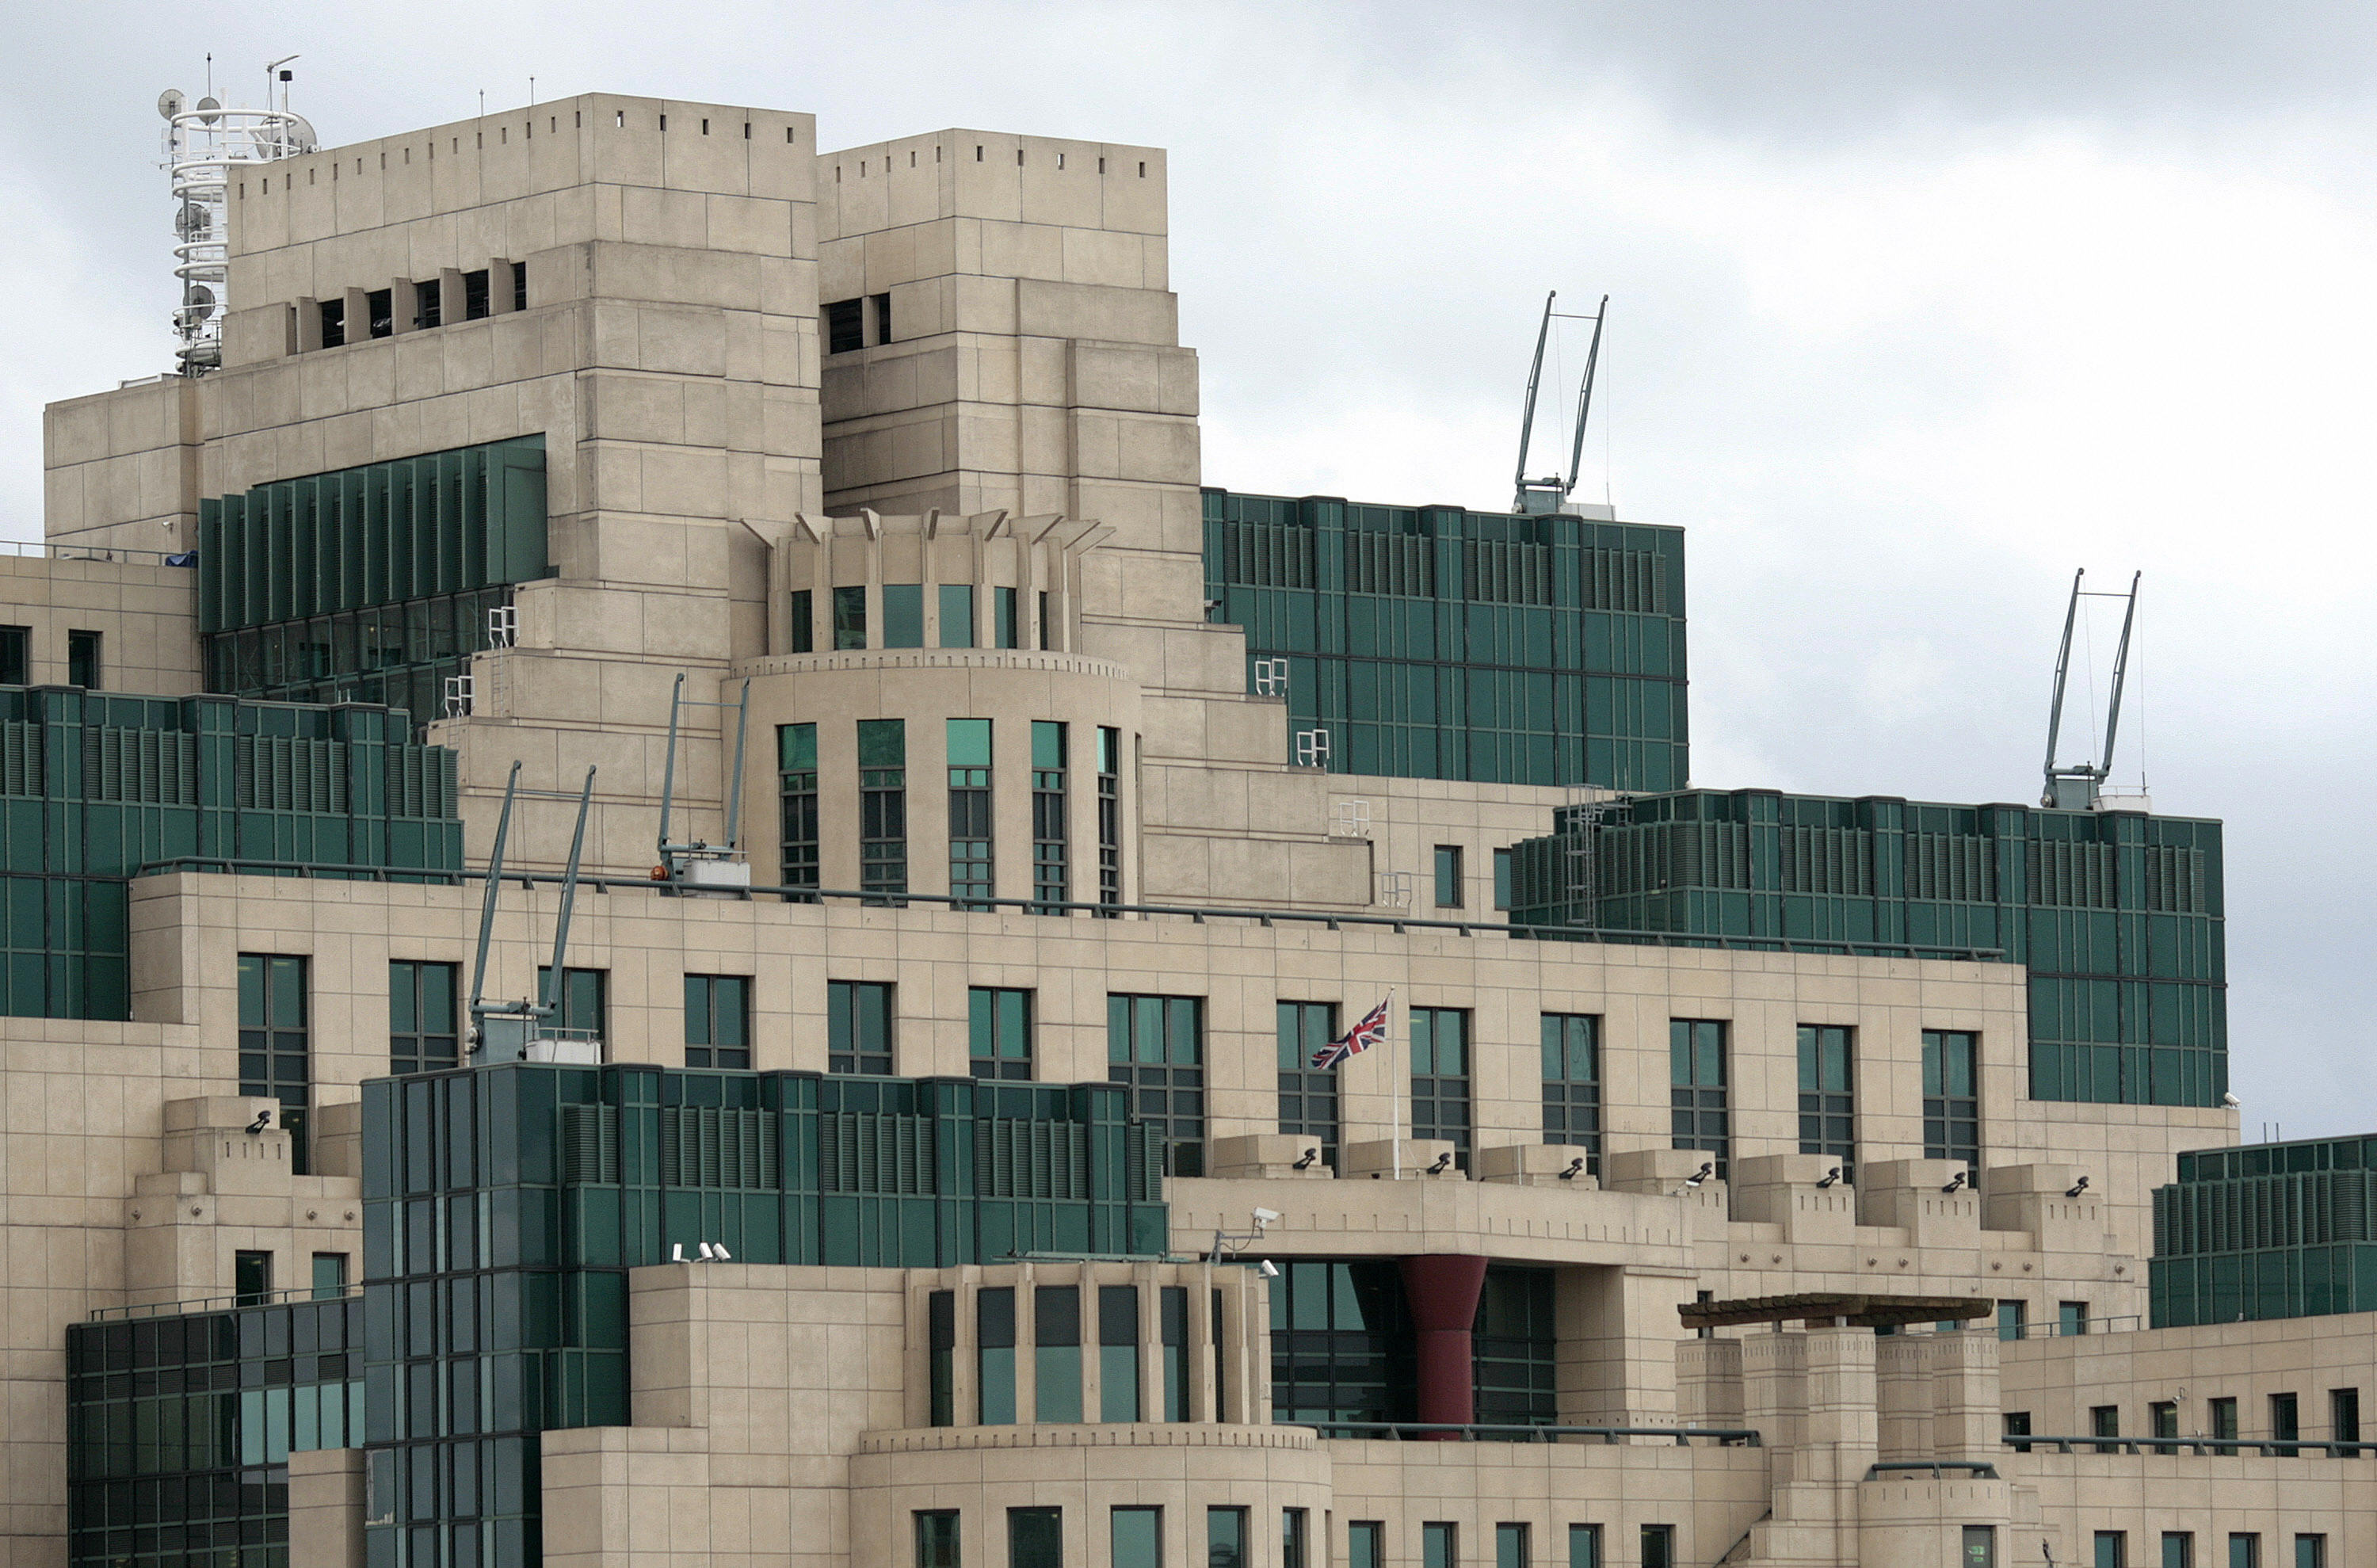 The MI6 building, which is the SIS (The Secret Intelligence Service) headquarter, is pictured at Vauxhall Cross in central London on March 3, 2009.